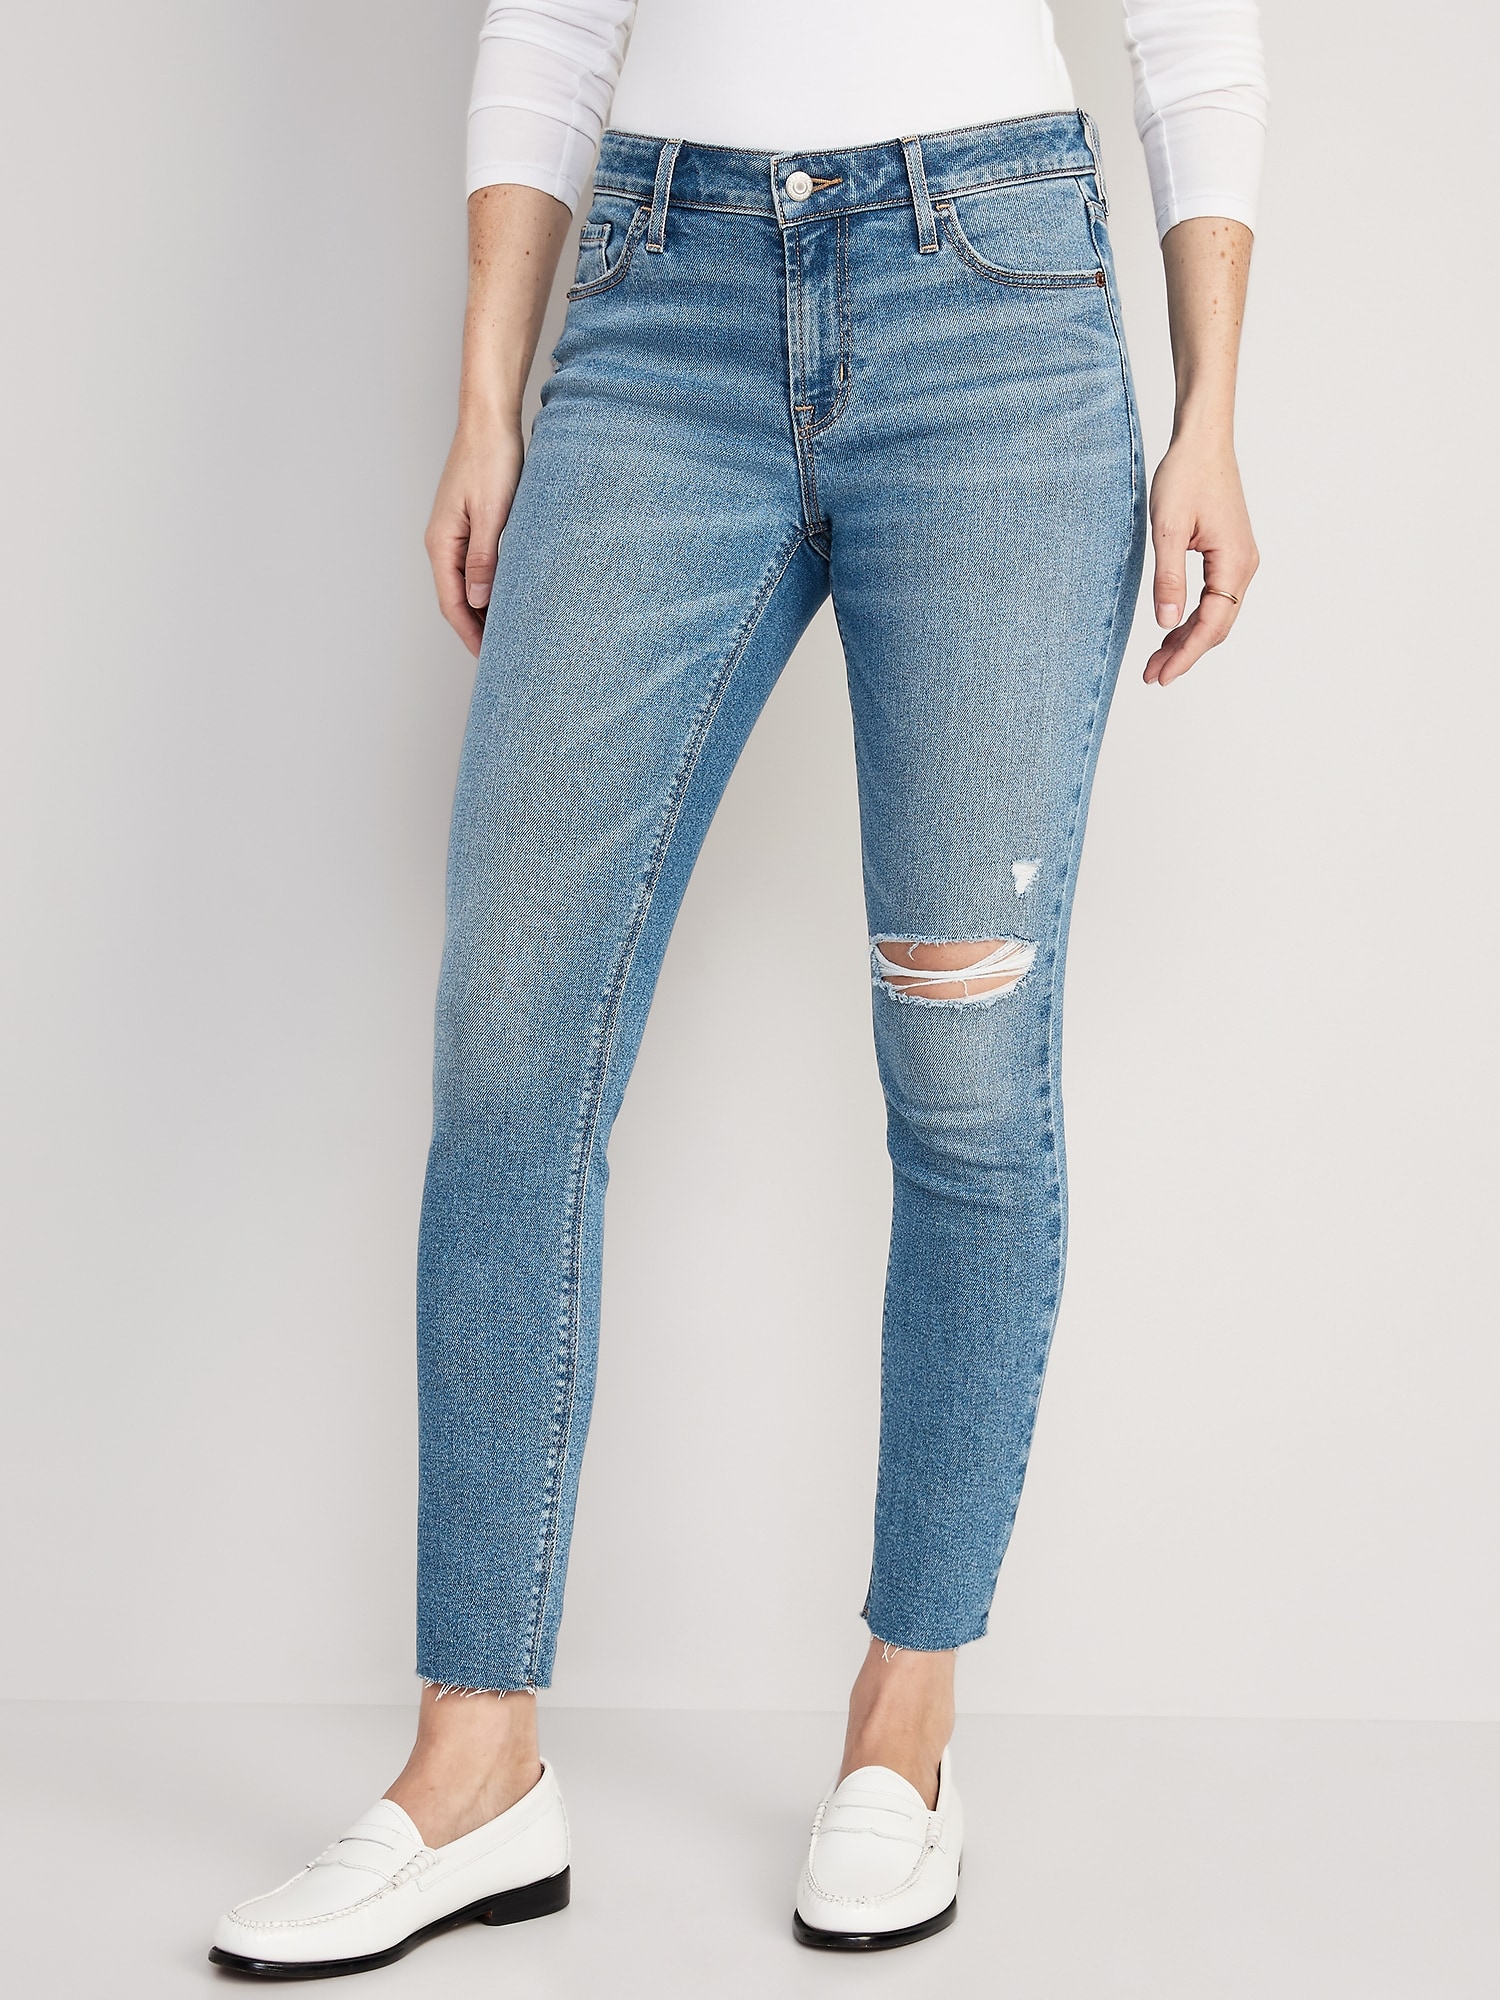 Chic Women\'s Jeans | Old Navy